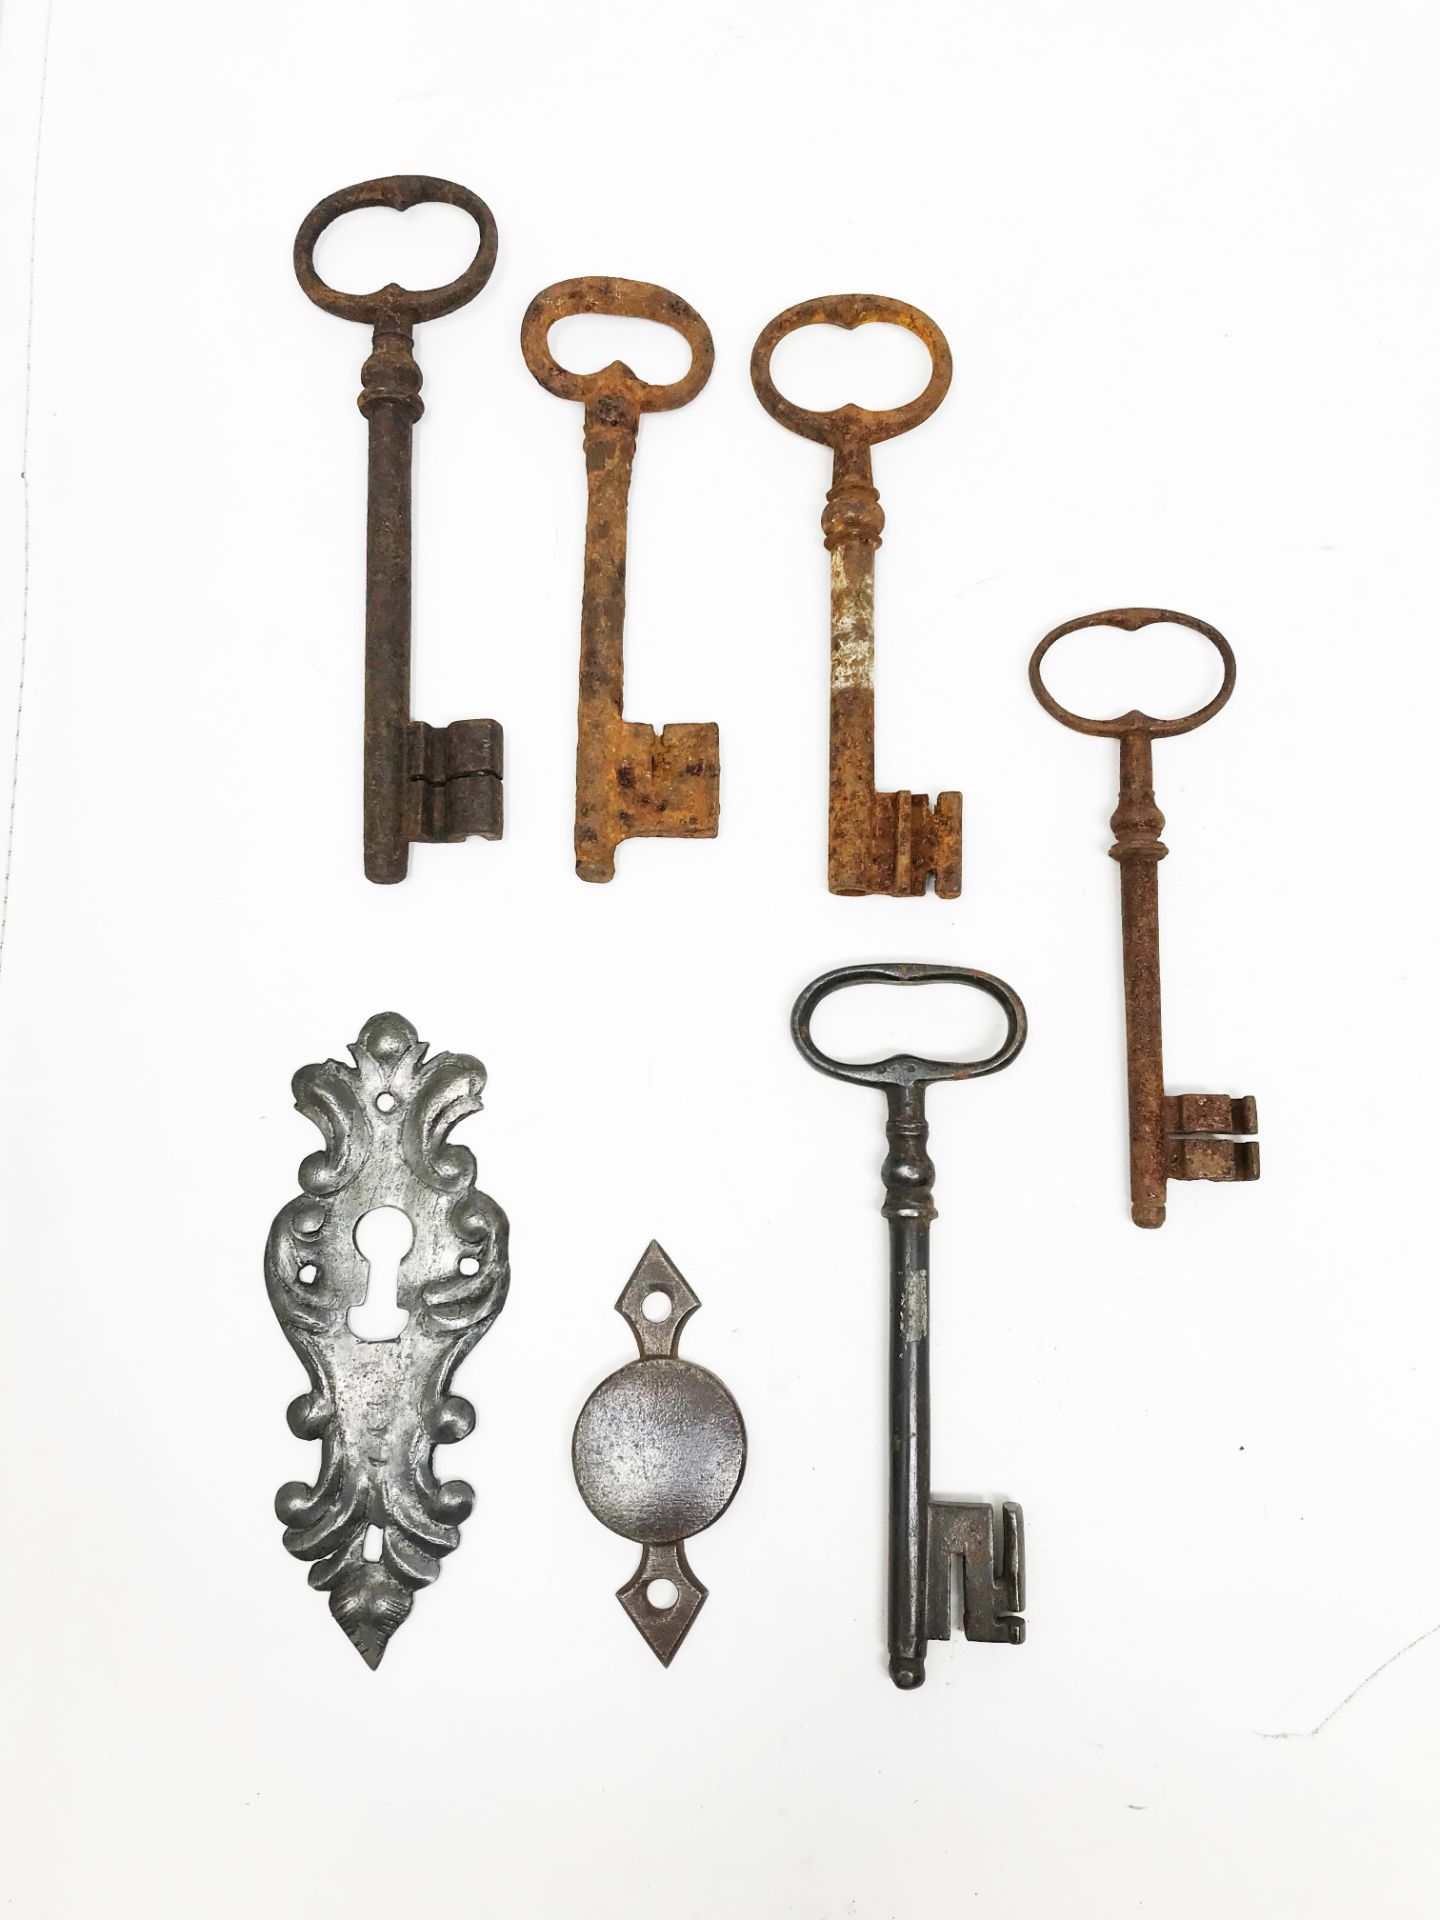 Five keys, one of which is drilled, one entrance and one barrel base. 15, 70 - 13, 37 - 13, 10 - 12,